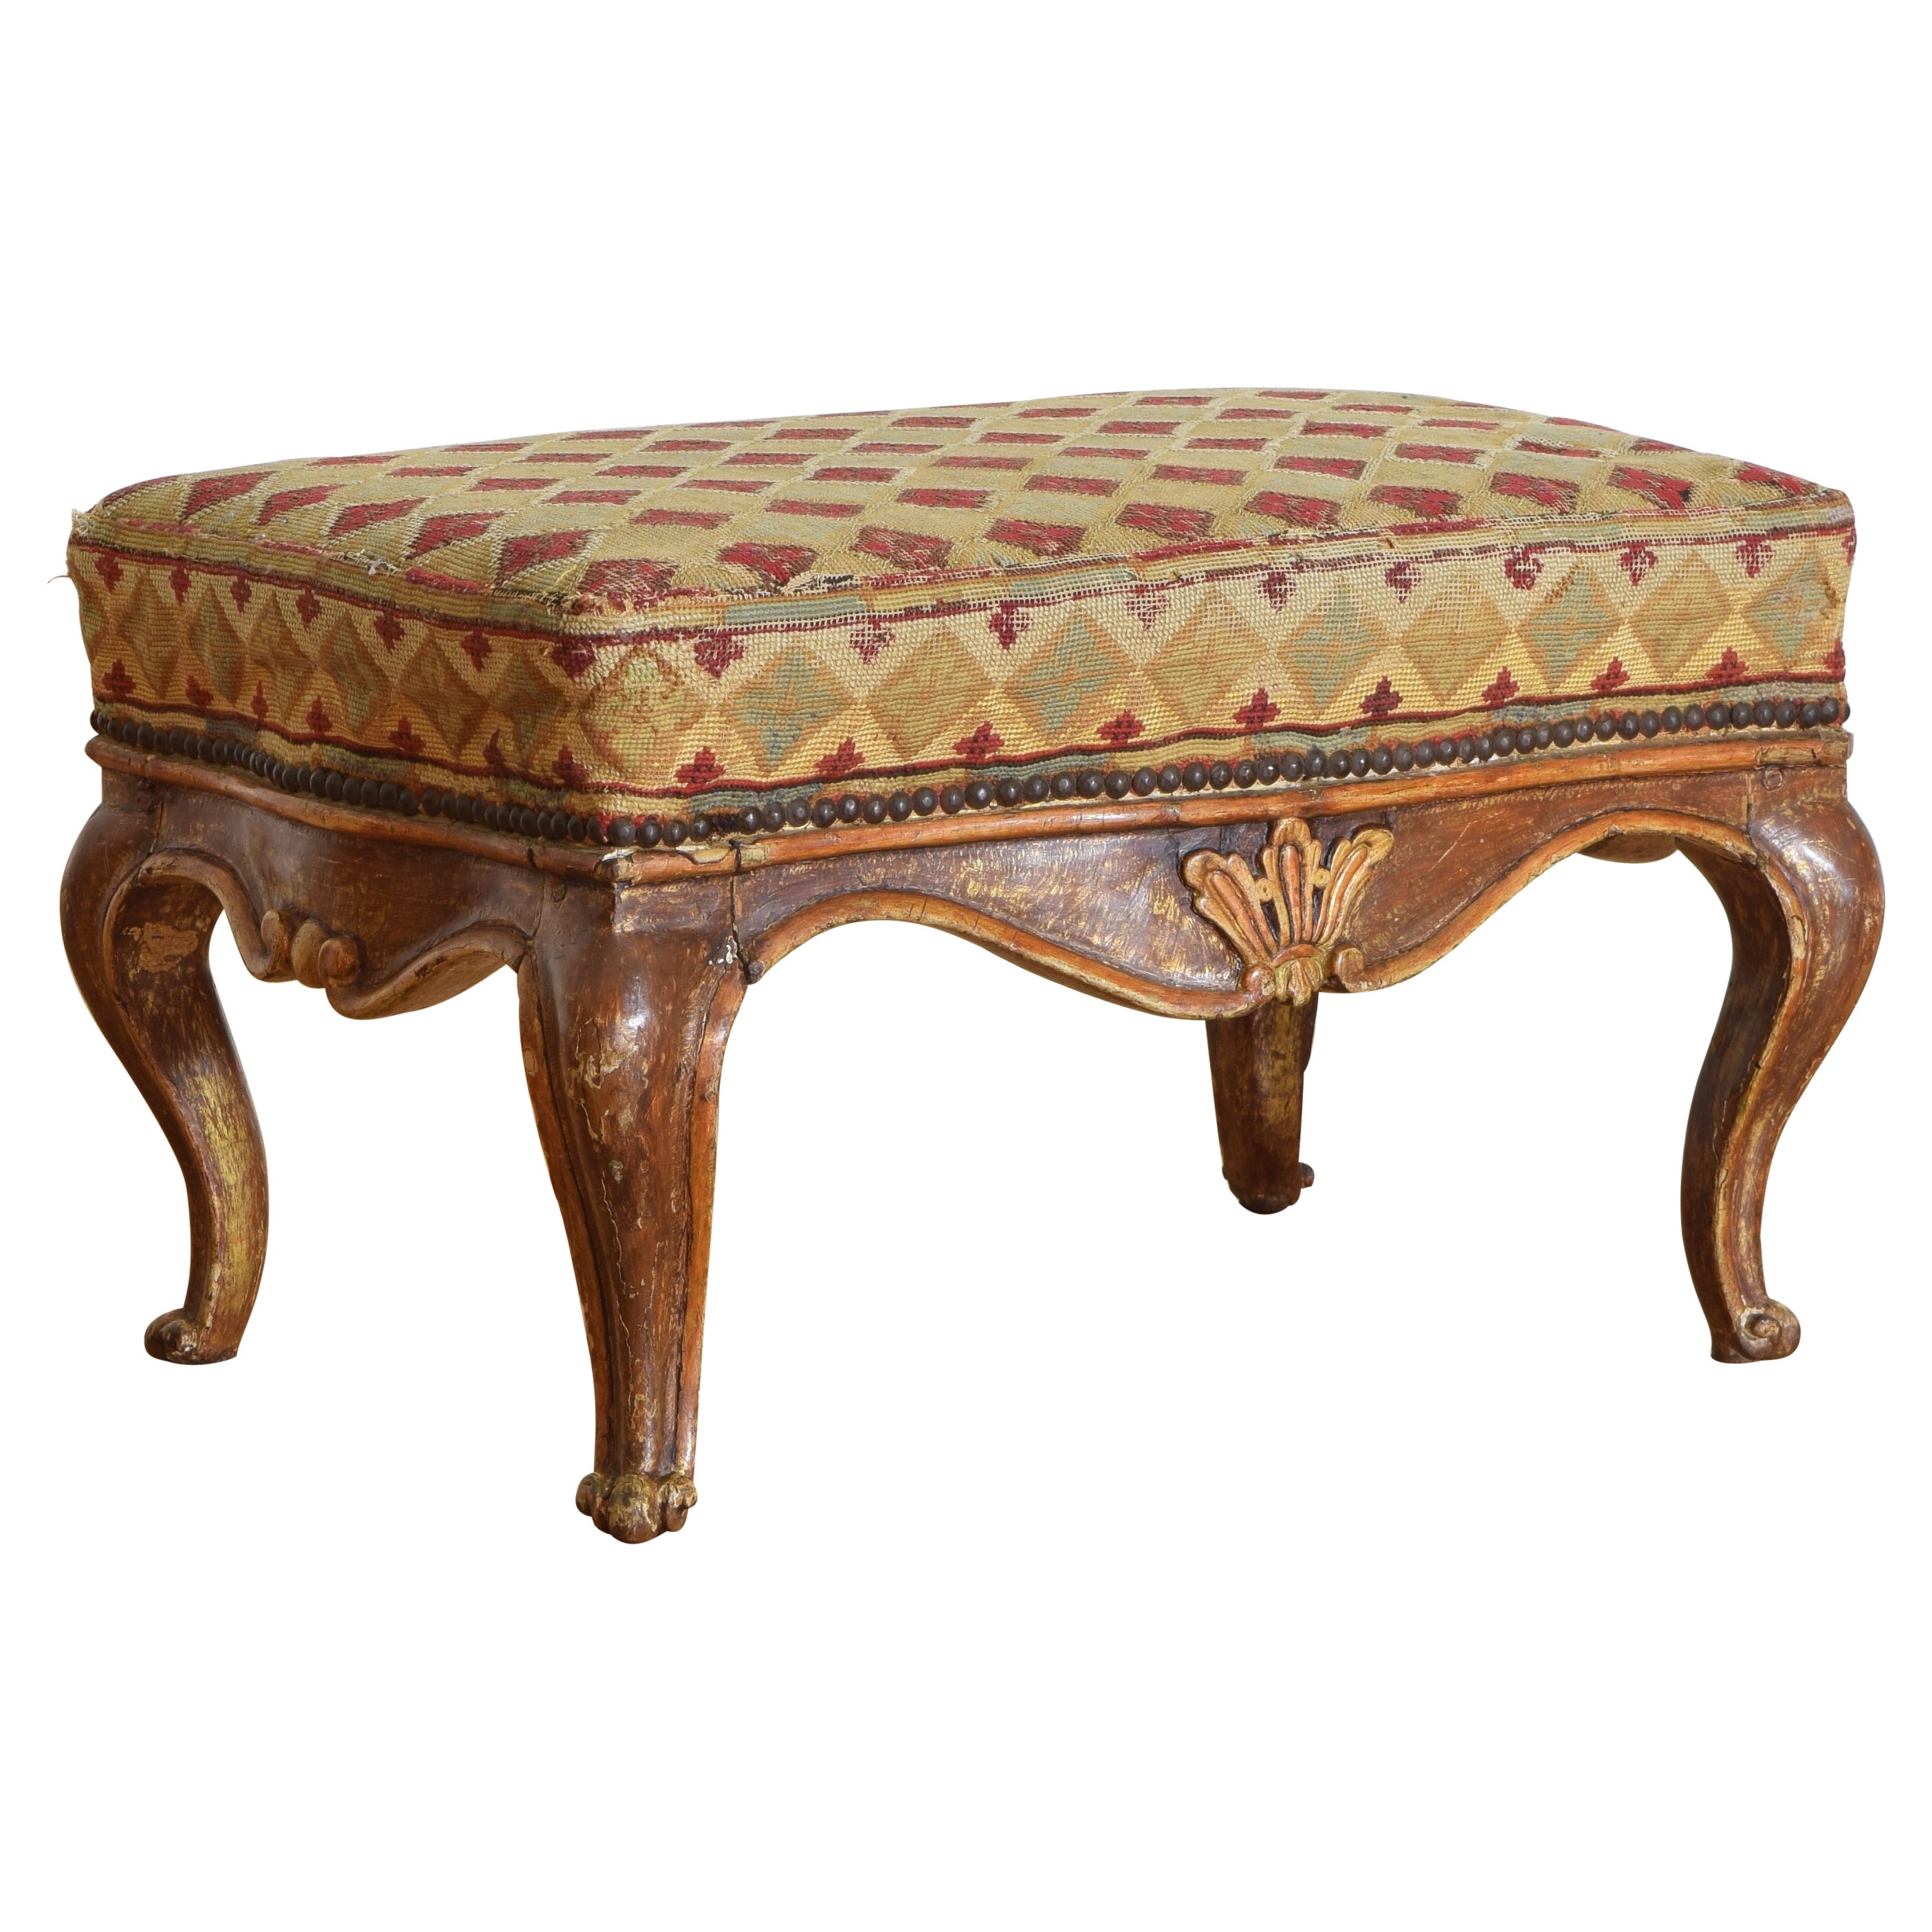 Italian, Piemontese, Rococo Period Lacquered and Gilded Footstool, Mid 18th Cen.